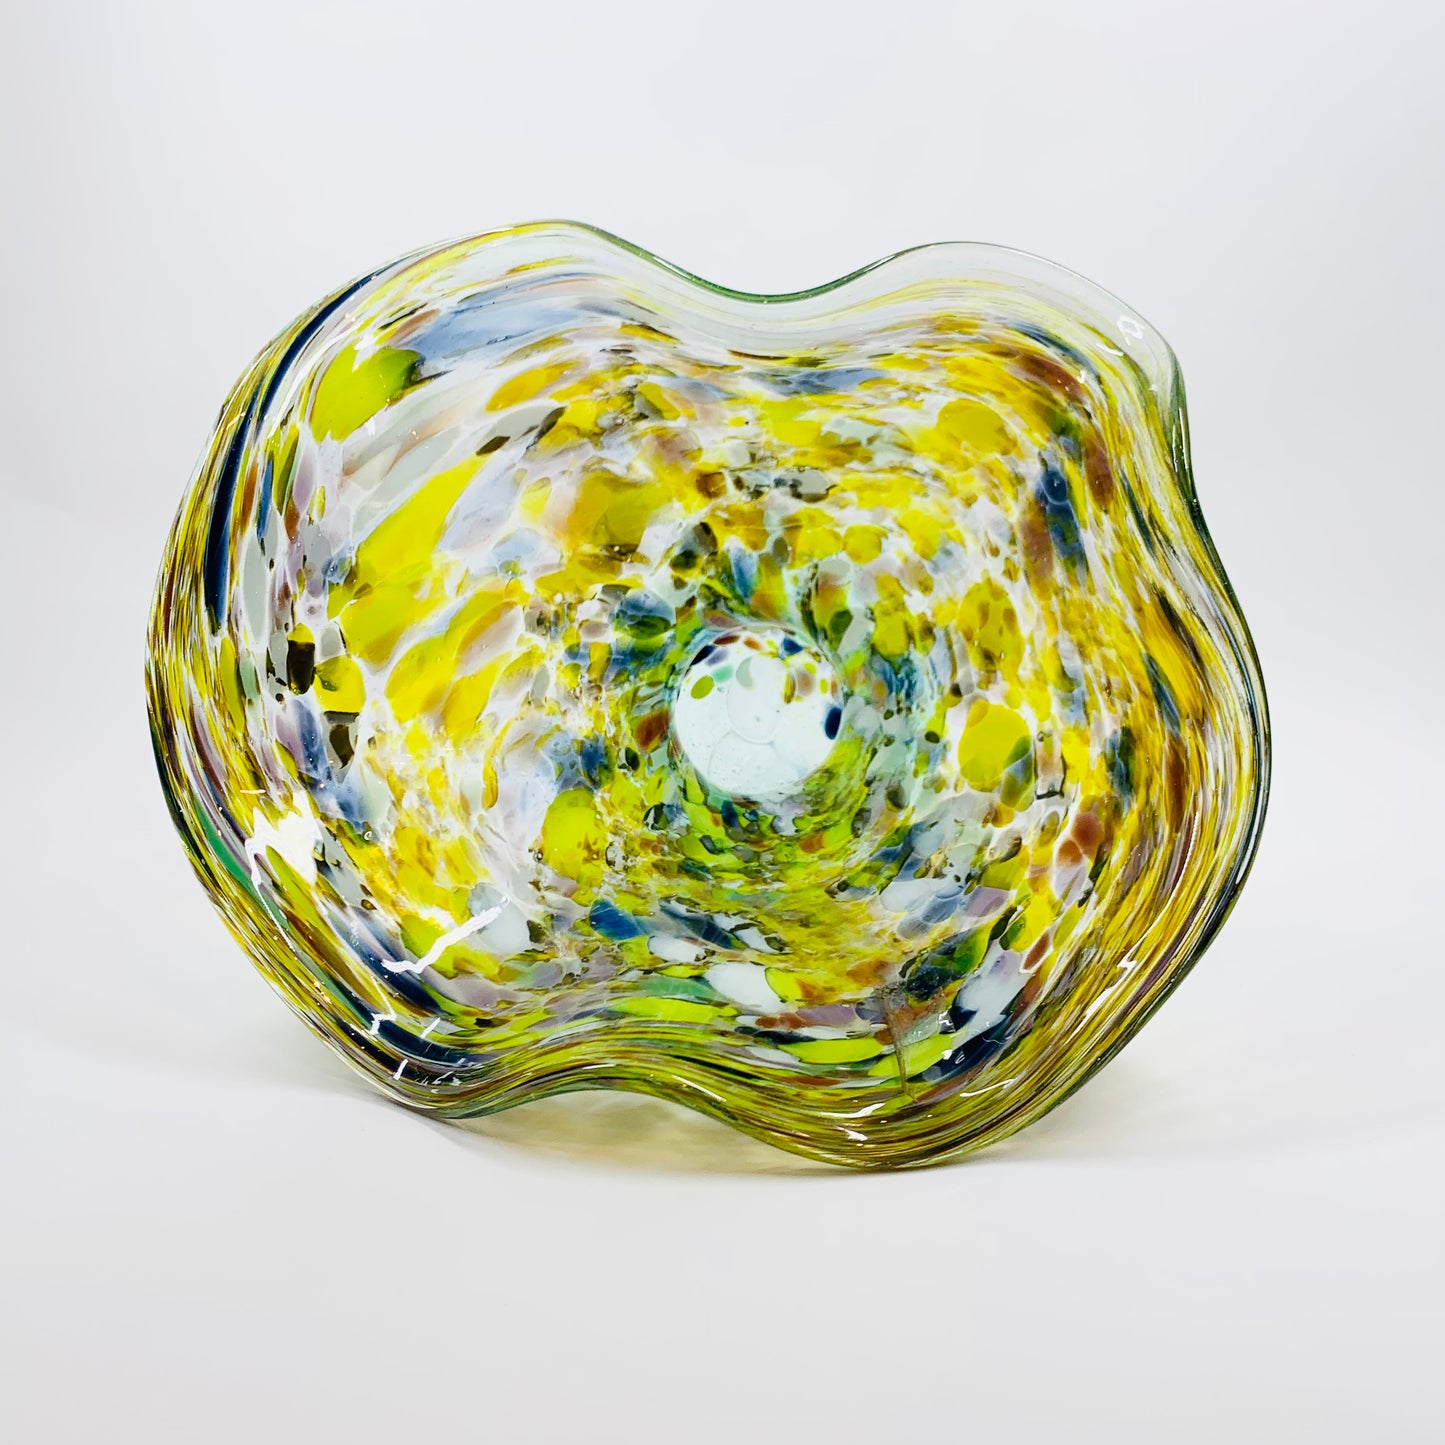 1980s Spanish recycled speckled harlequin glass handkerchief bowl